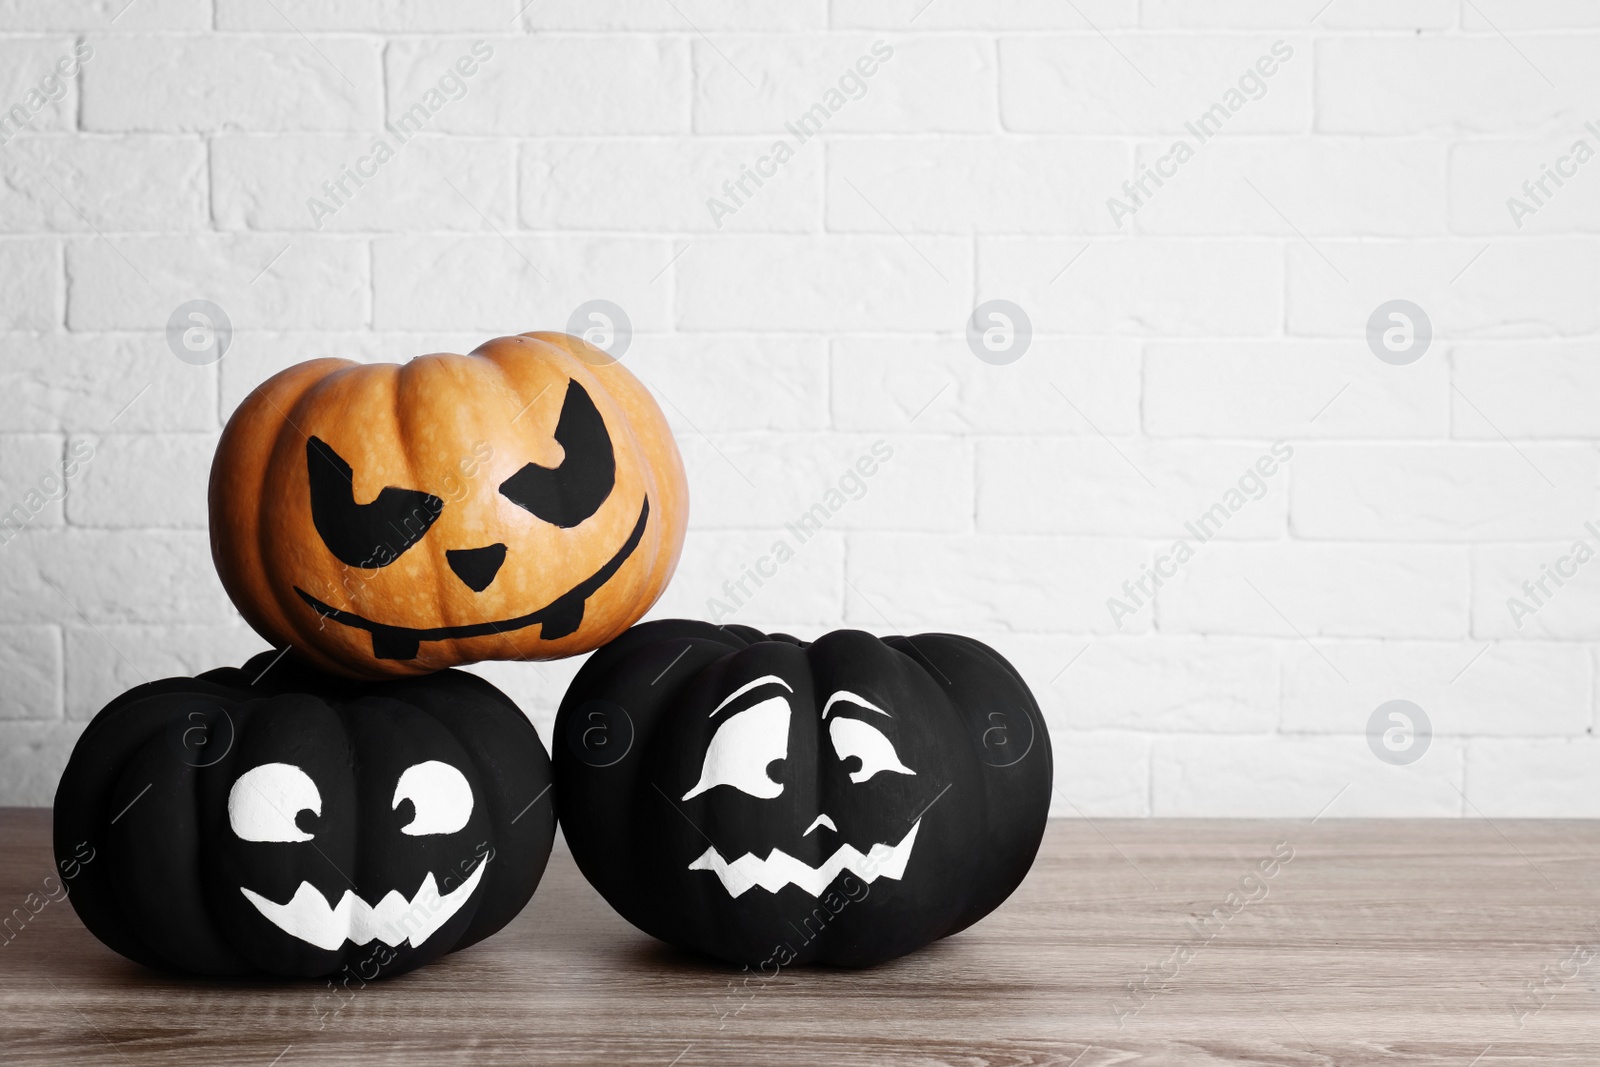 Photo of Pumpkins with scary faces near brick wall, space for text. Halloween decor